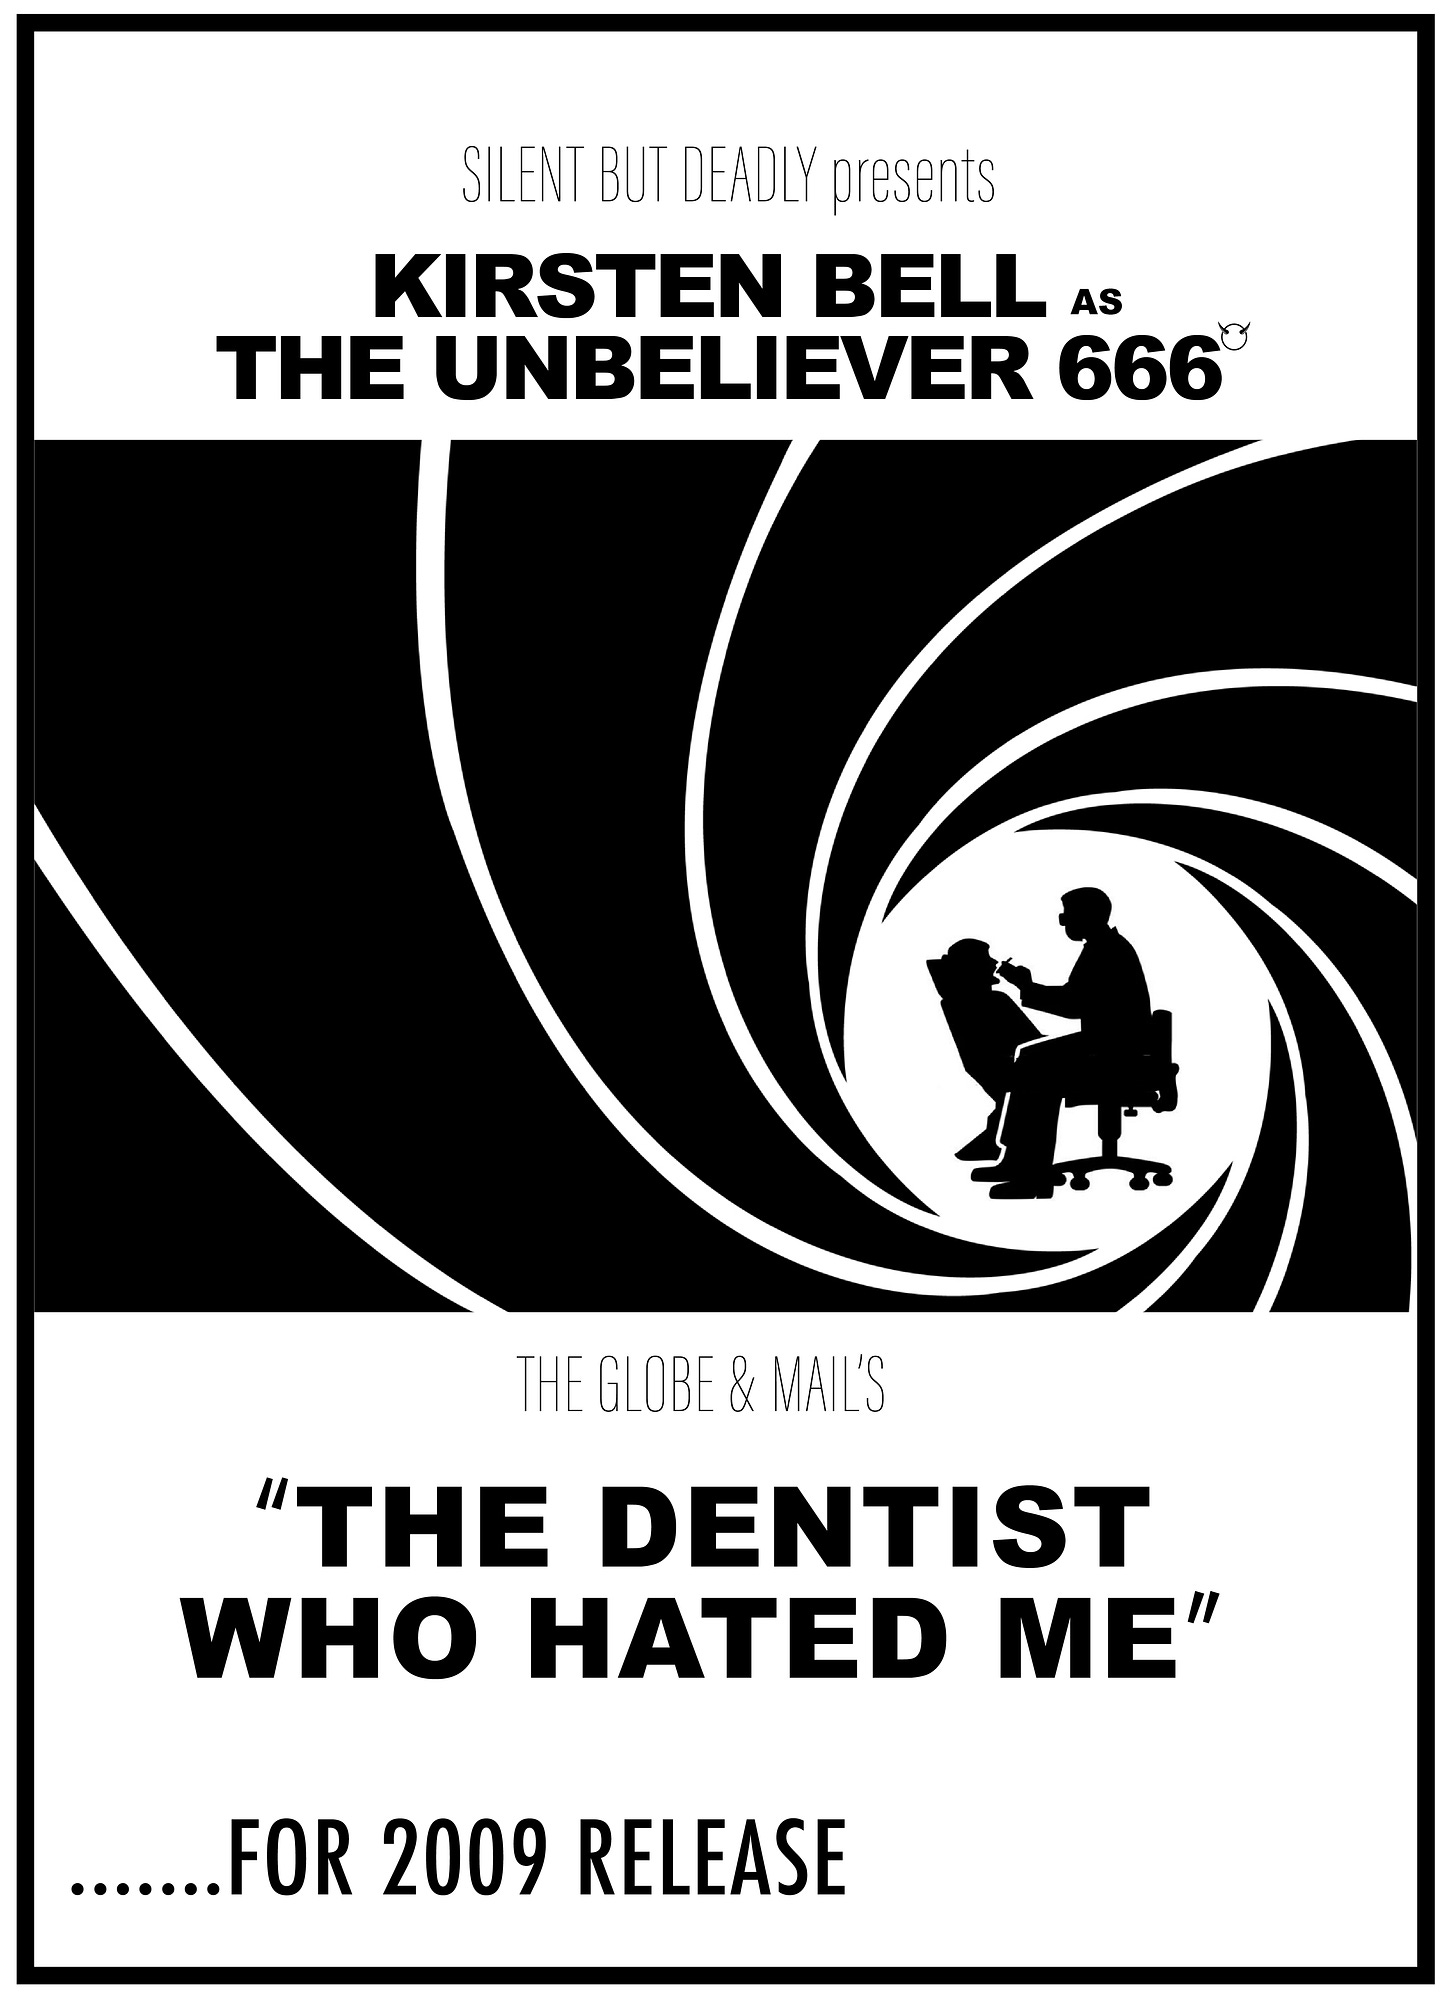 Fake film poster of 'The Dentist Who Hated Me' by Kirsten Bell